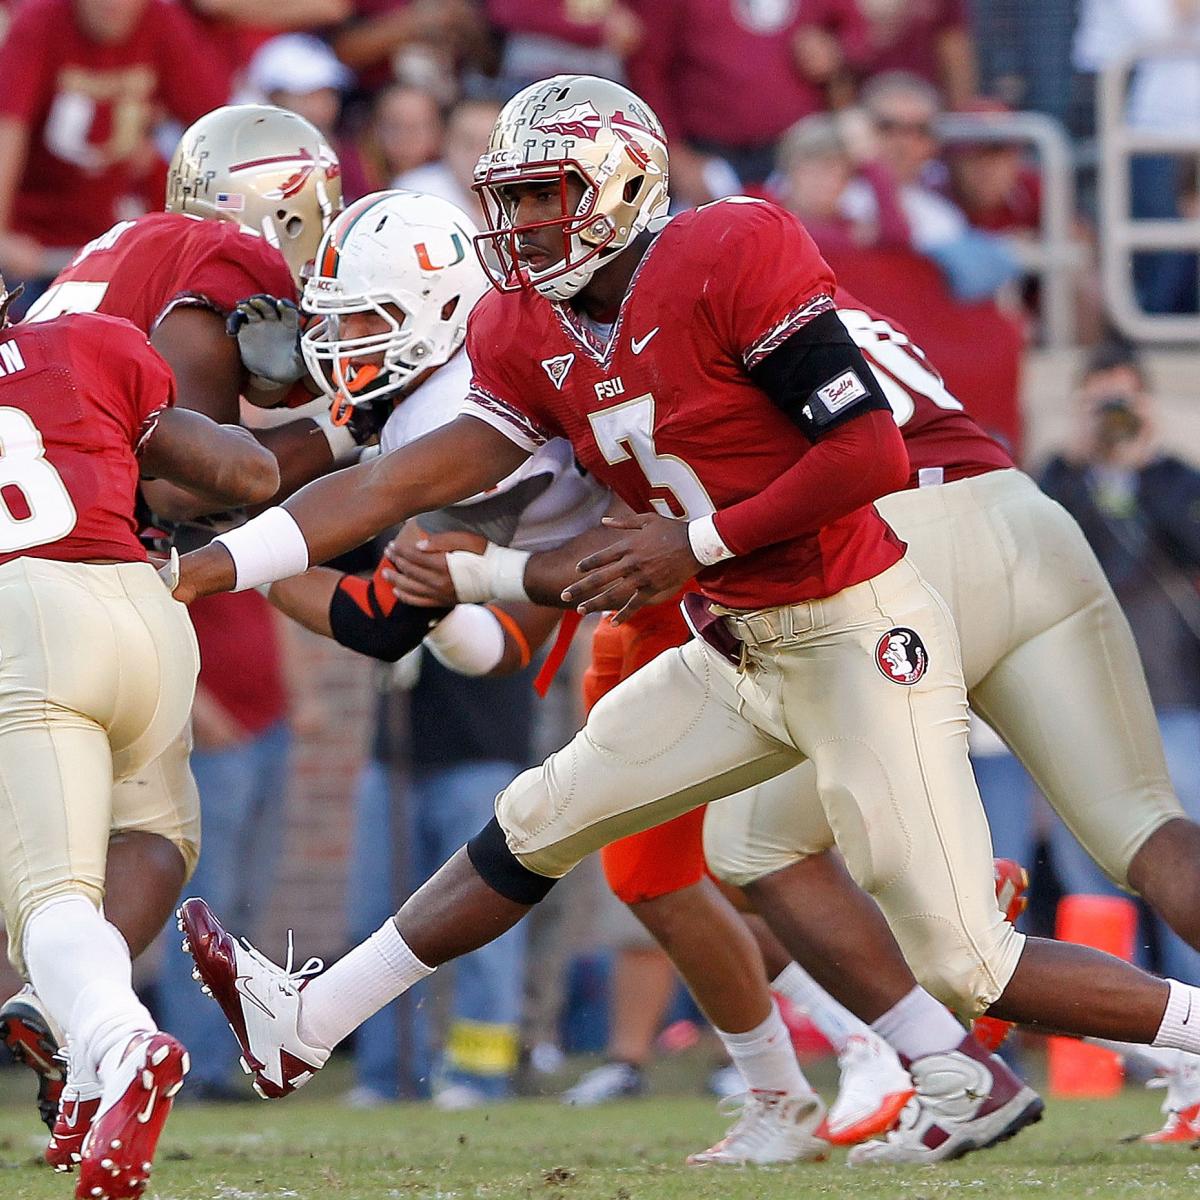 Florida State Football Spring Game Live News, Analysis and Results